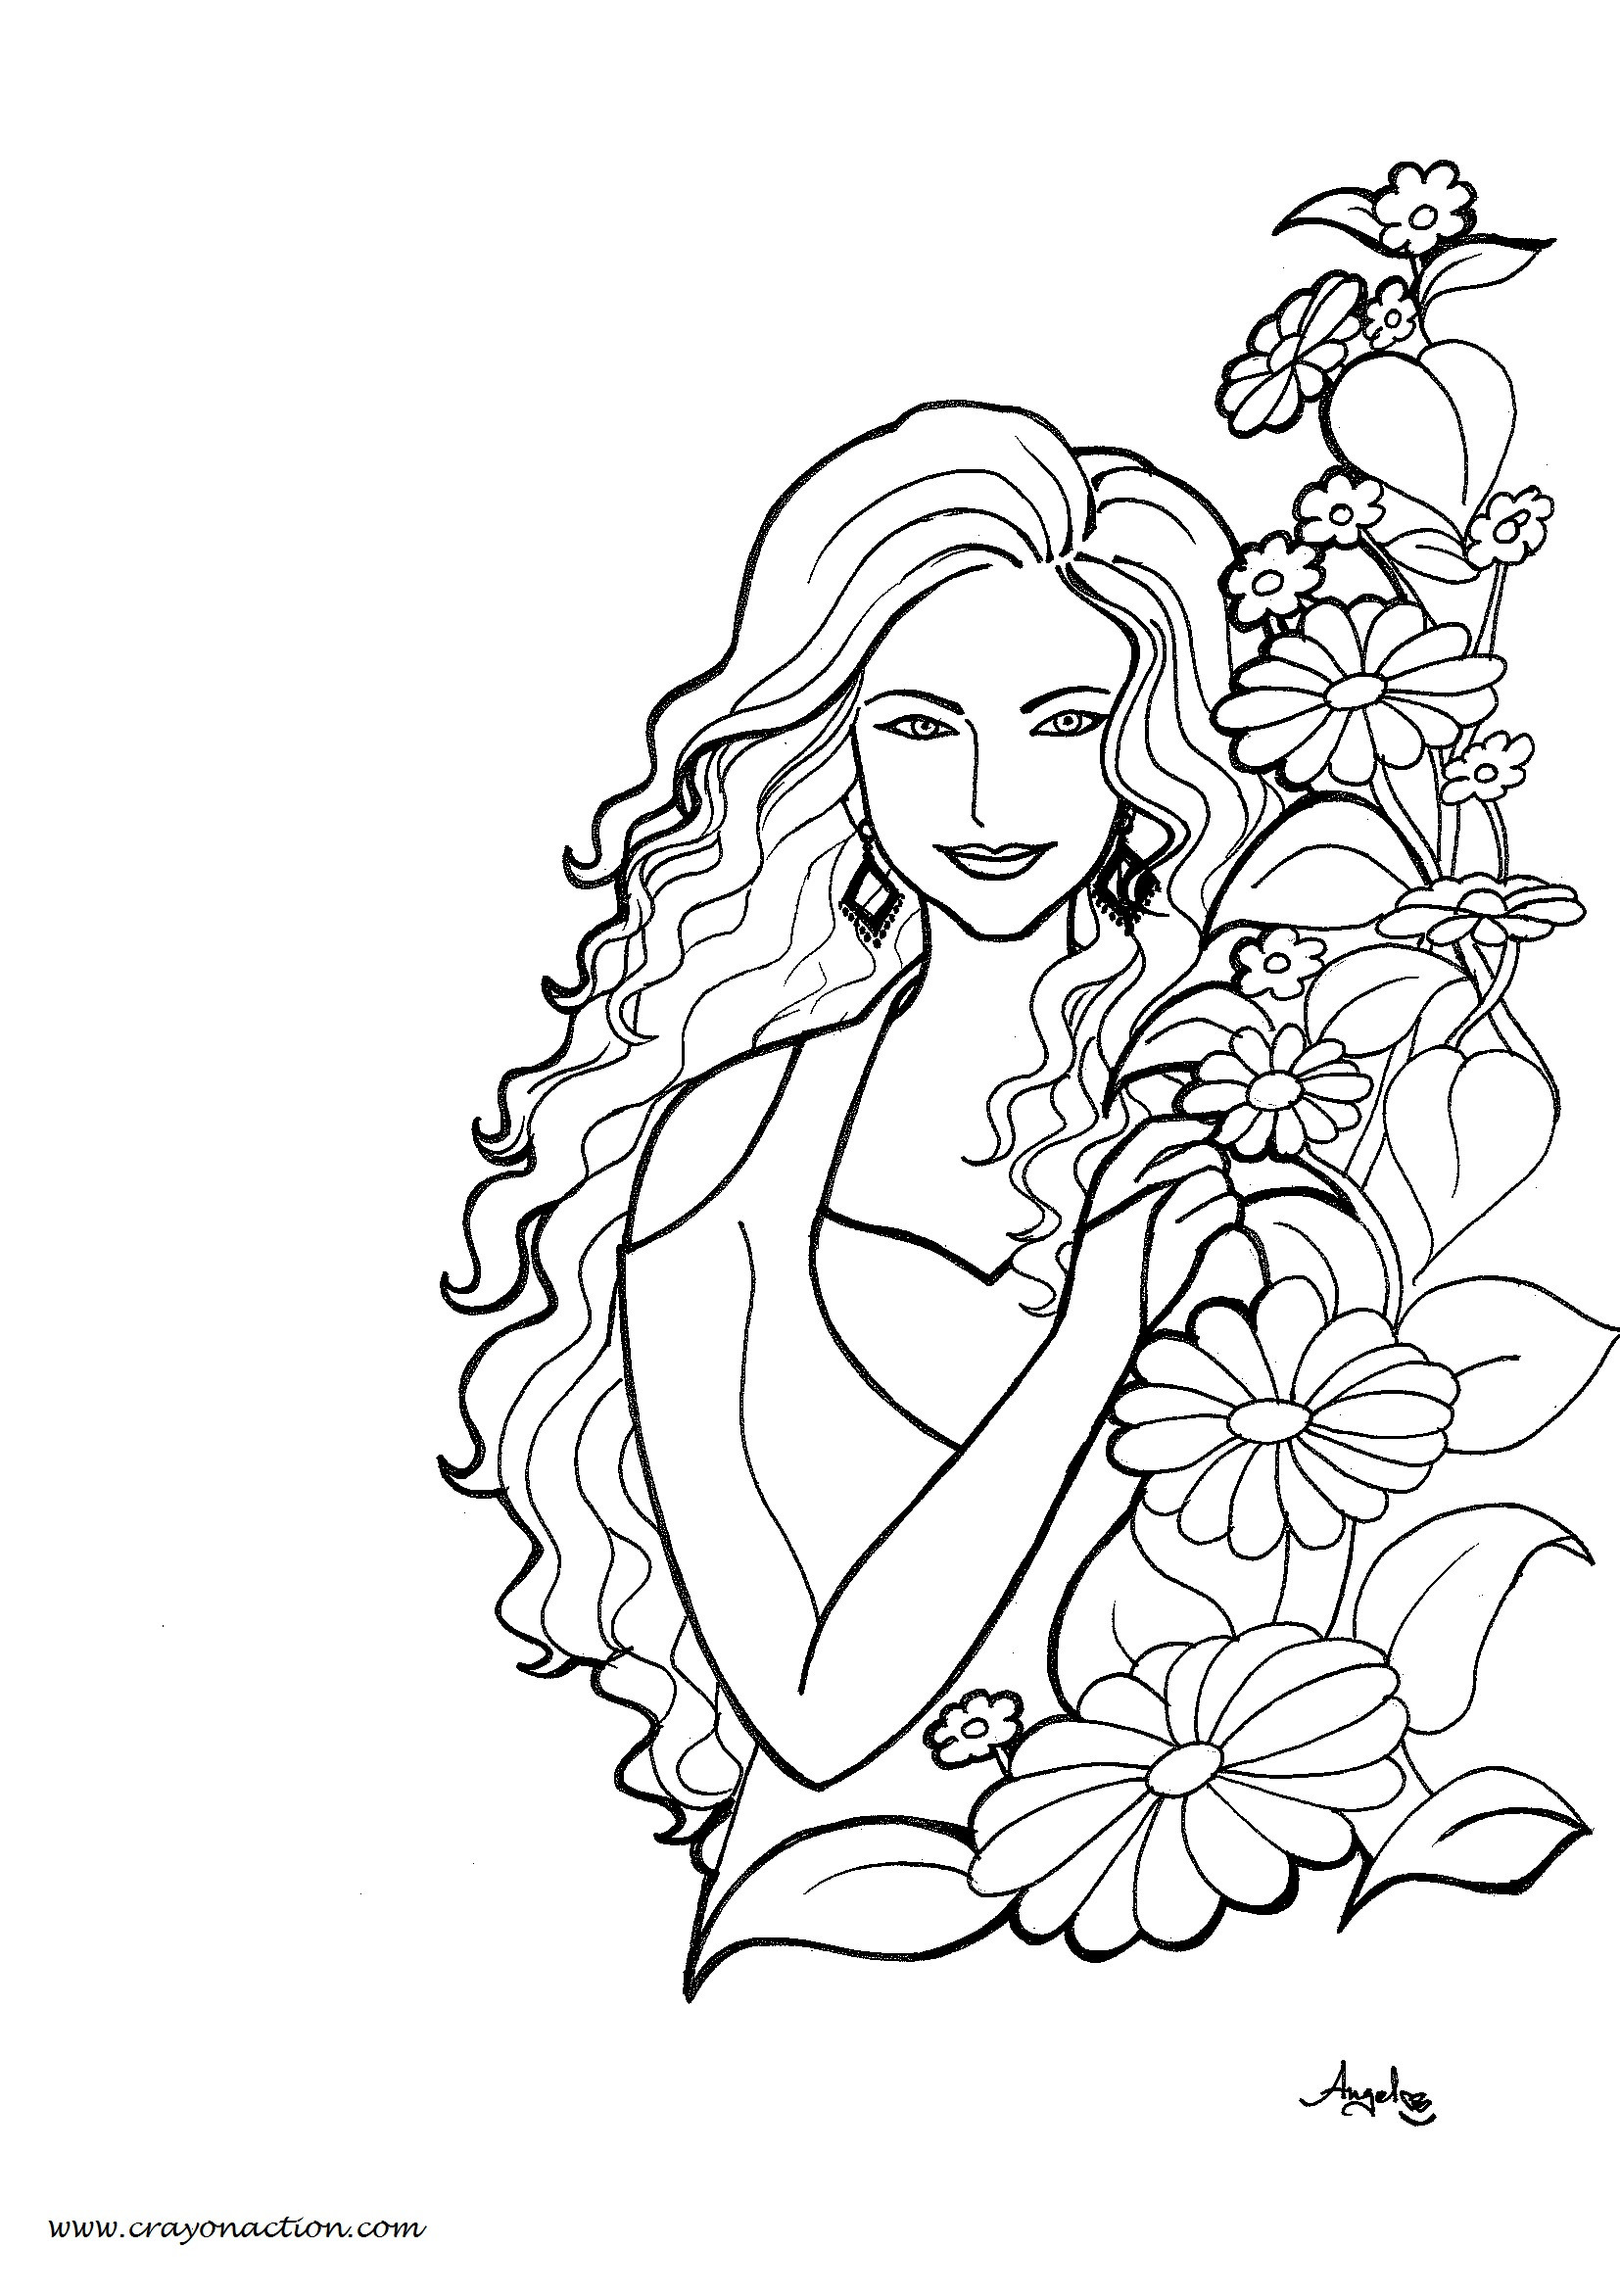 Female Coloring Pages
 Beautiful Gothic Woman Coloring Pages Coloring Pages